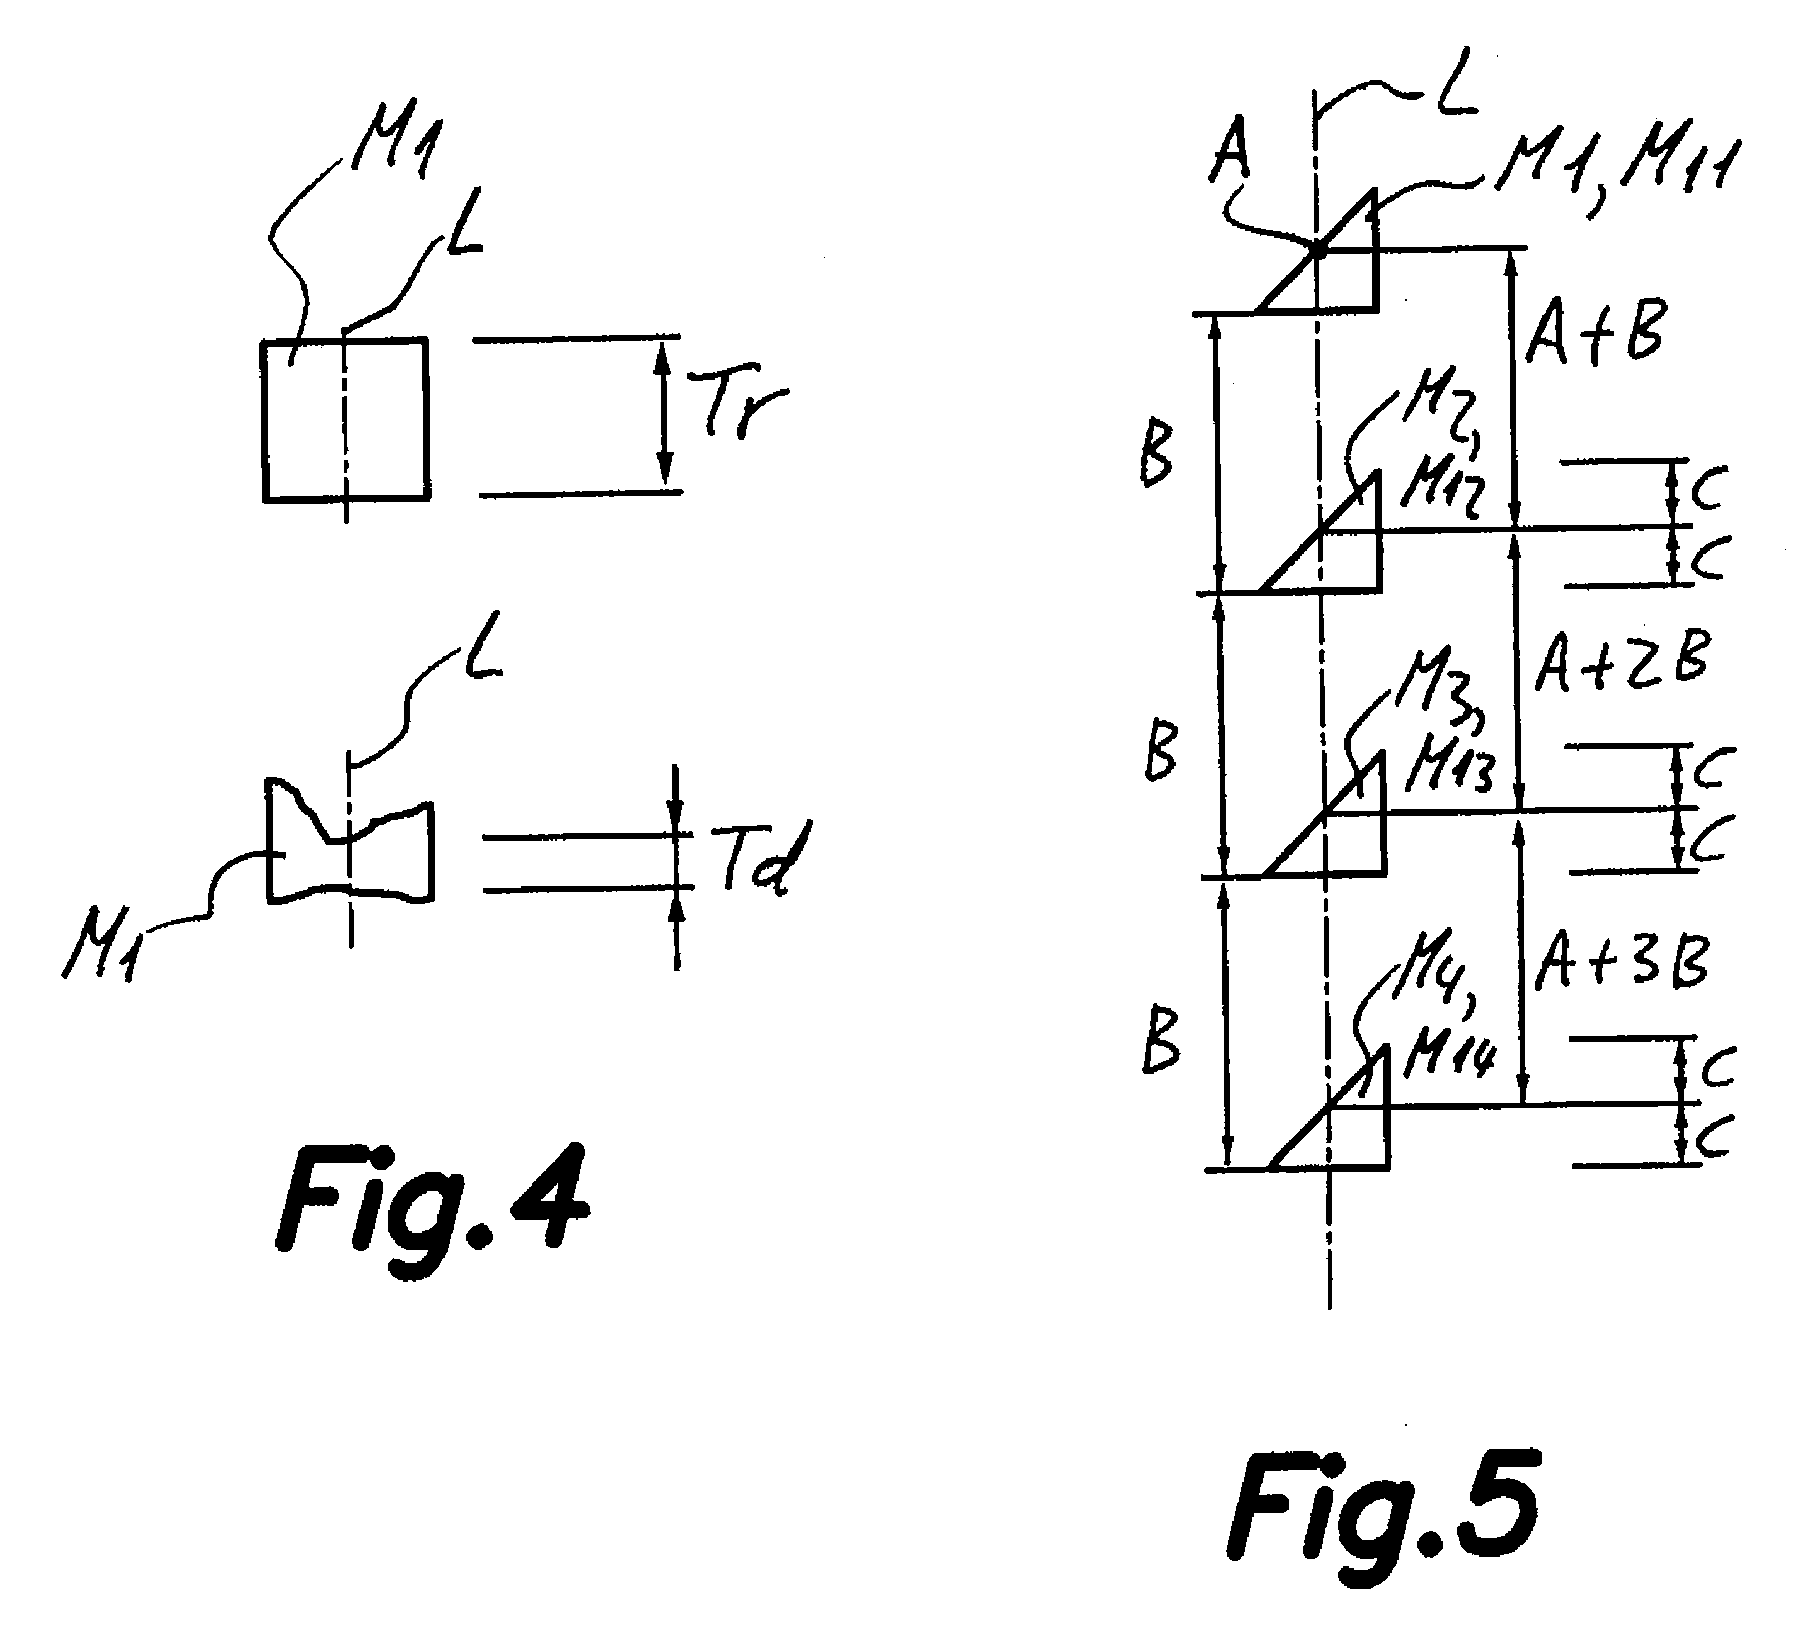 Method of automatically adjusting the printing pressure in flexographic printing machines